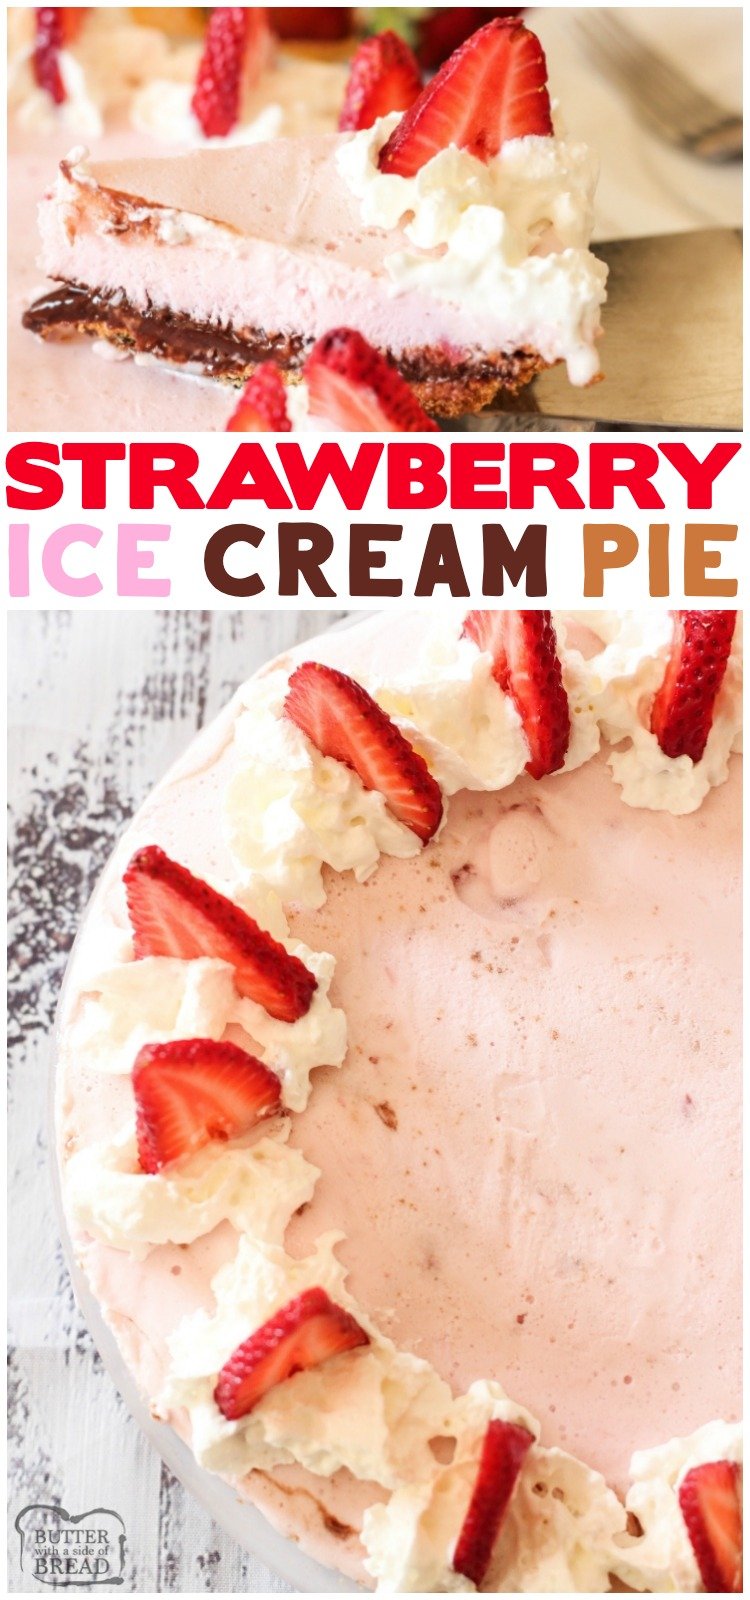 Strawberry Ice Cream Pie is a simple dessert made with a graham cracker crust, hot fudge and strawberry ice cream. This ice cream pie recipe comes together quick with just a few ingredients.